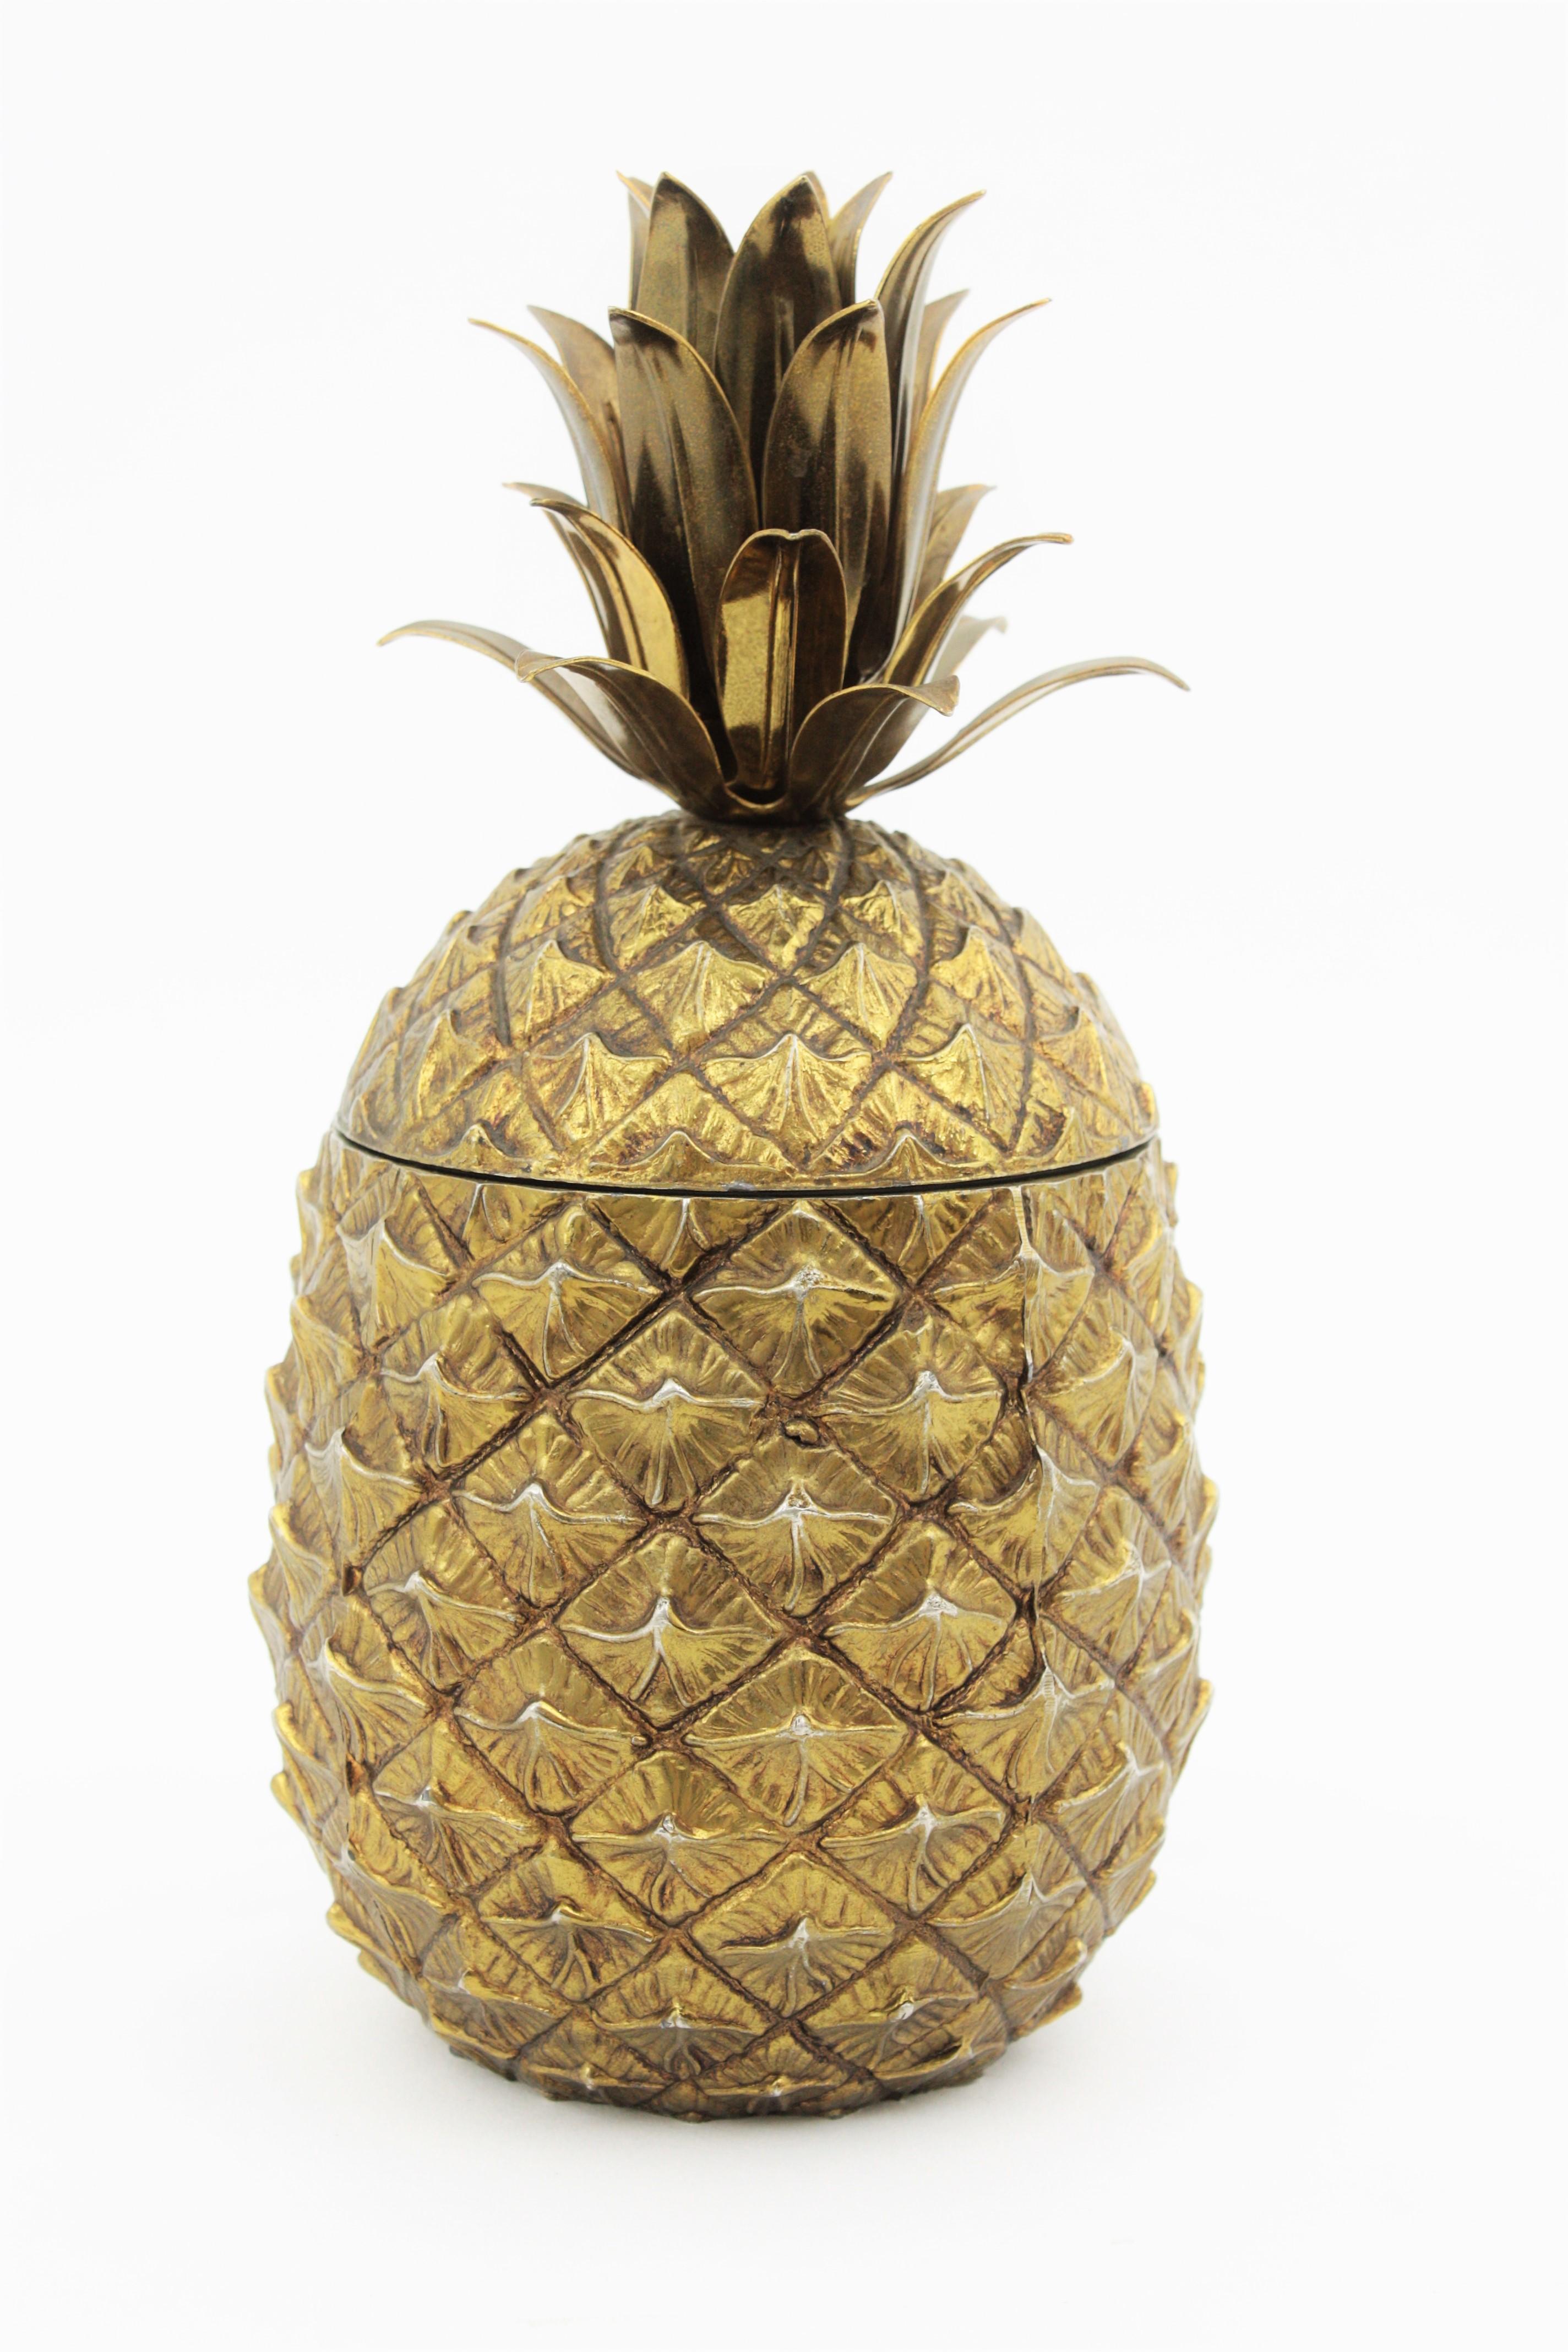 Hollywood Regency Mid-century Modern Gold Pineapple Ice Bucket by Mauro Manetti, Italy, 1960s